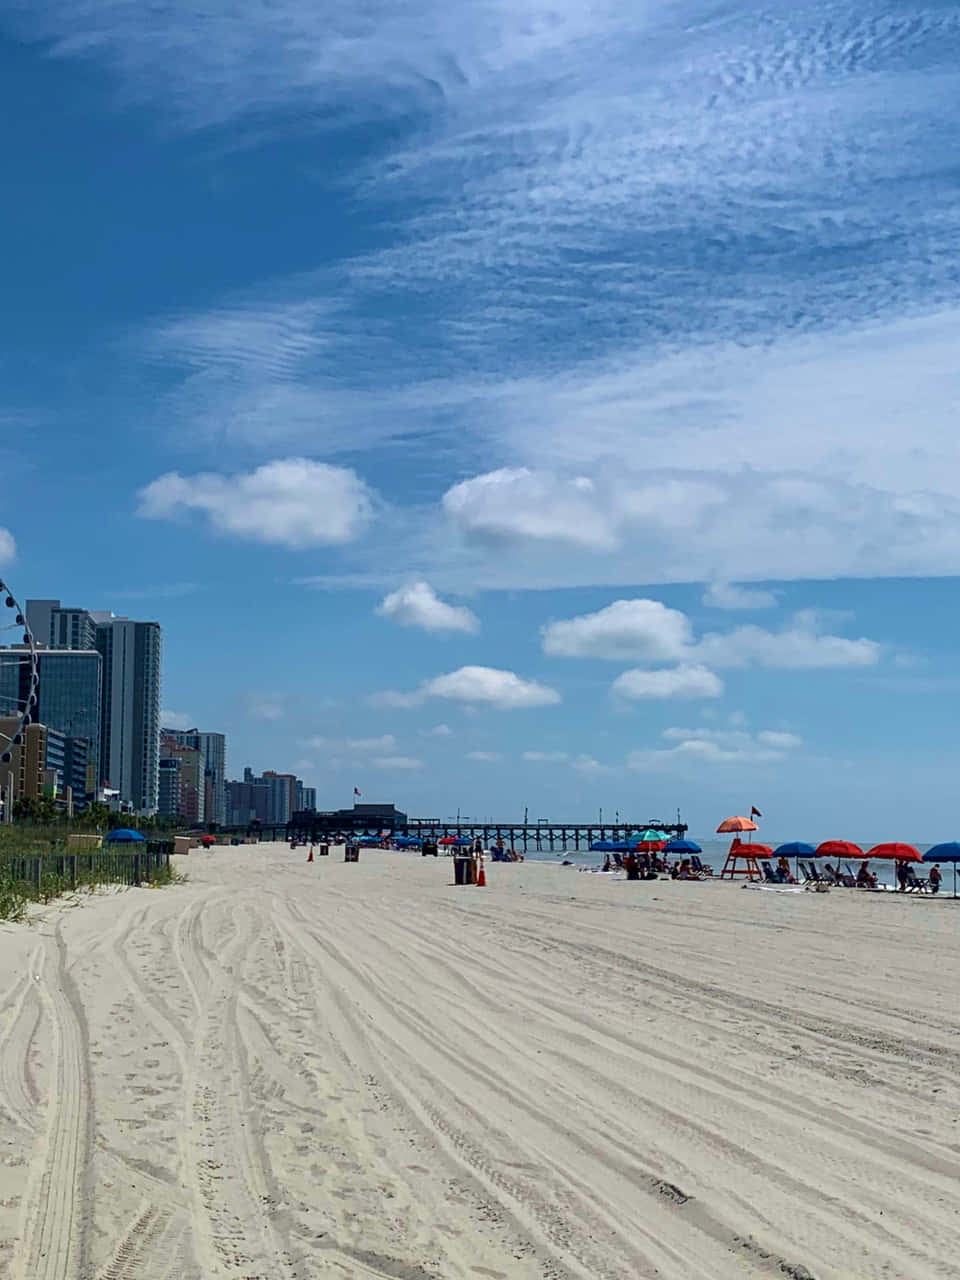 Enjoy the sights and beautiful landscapes of Myrtle Beach.